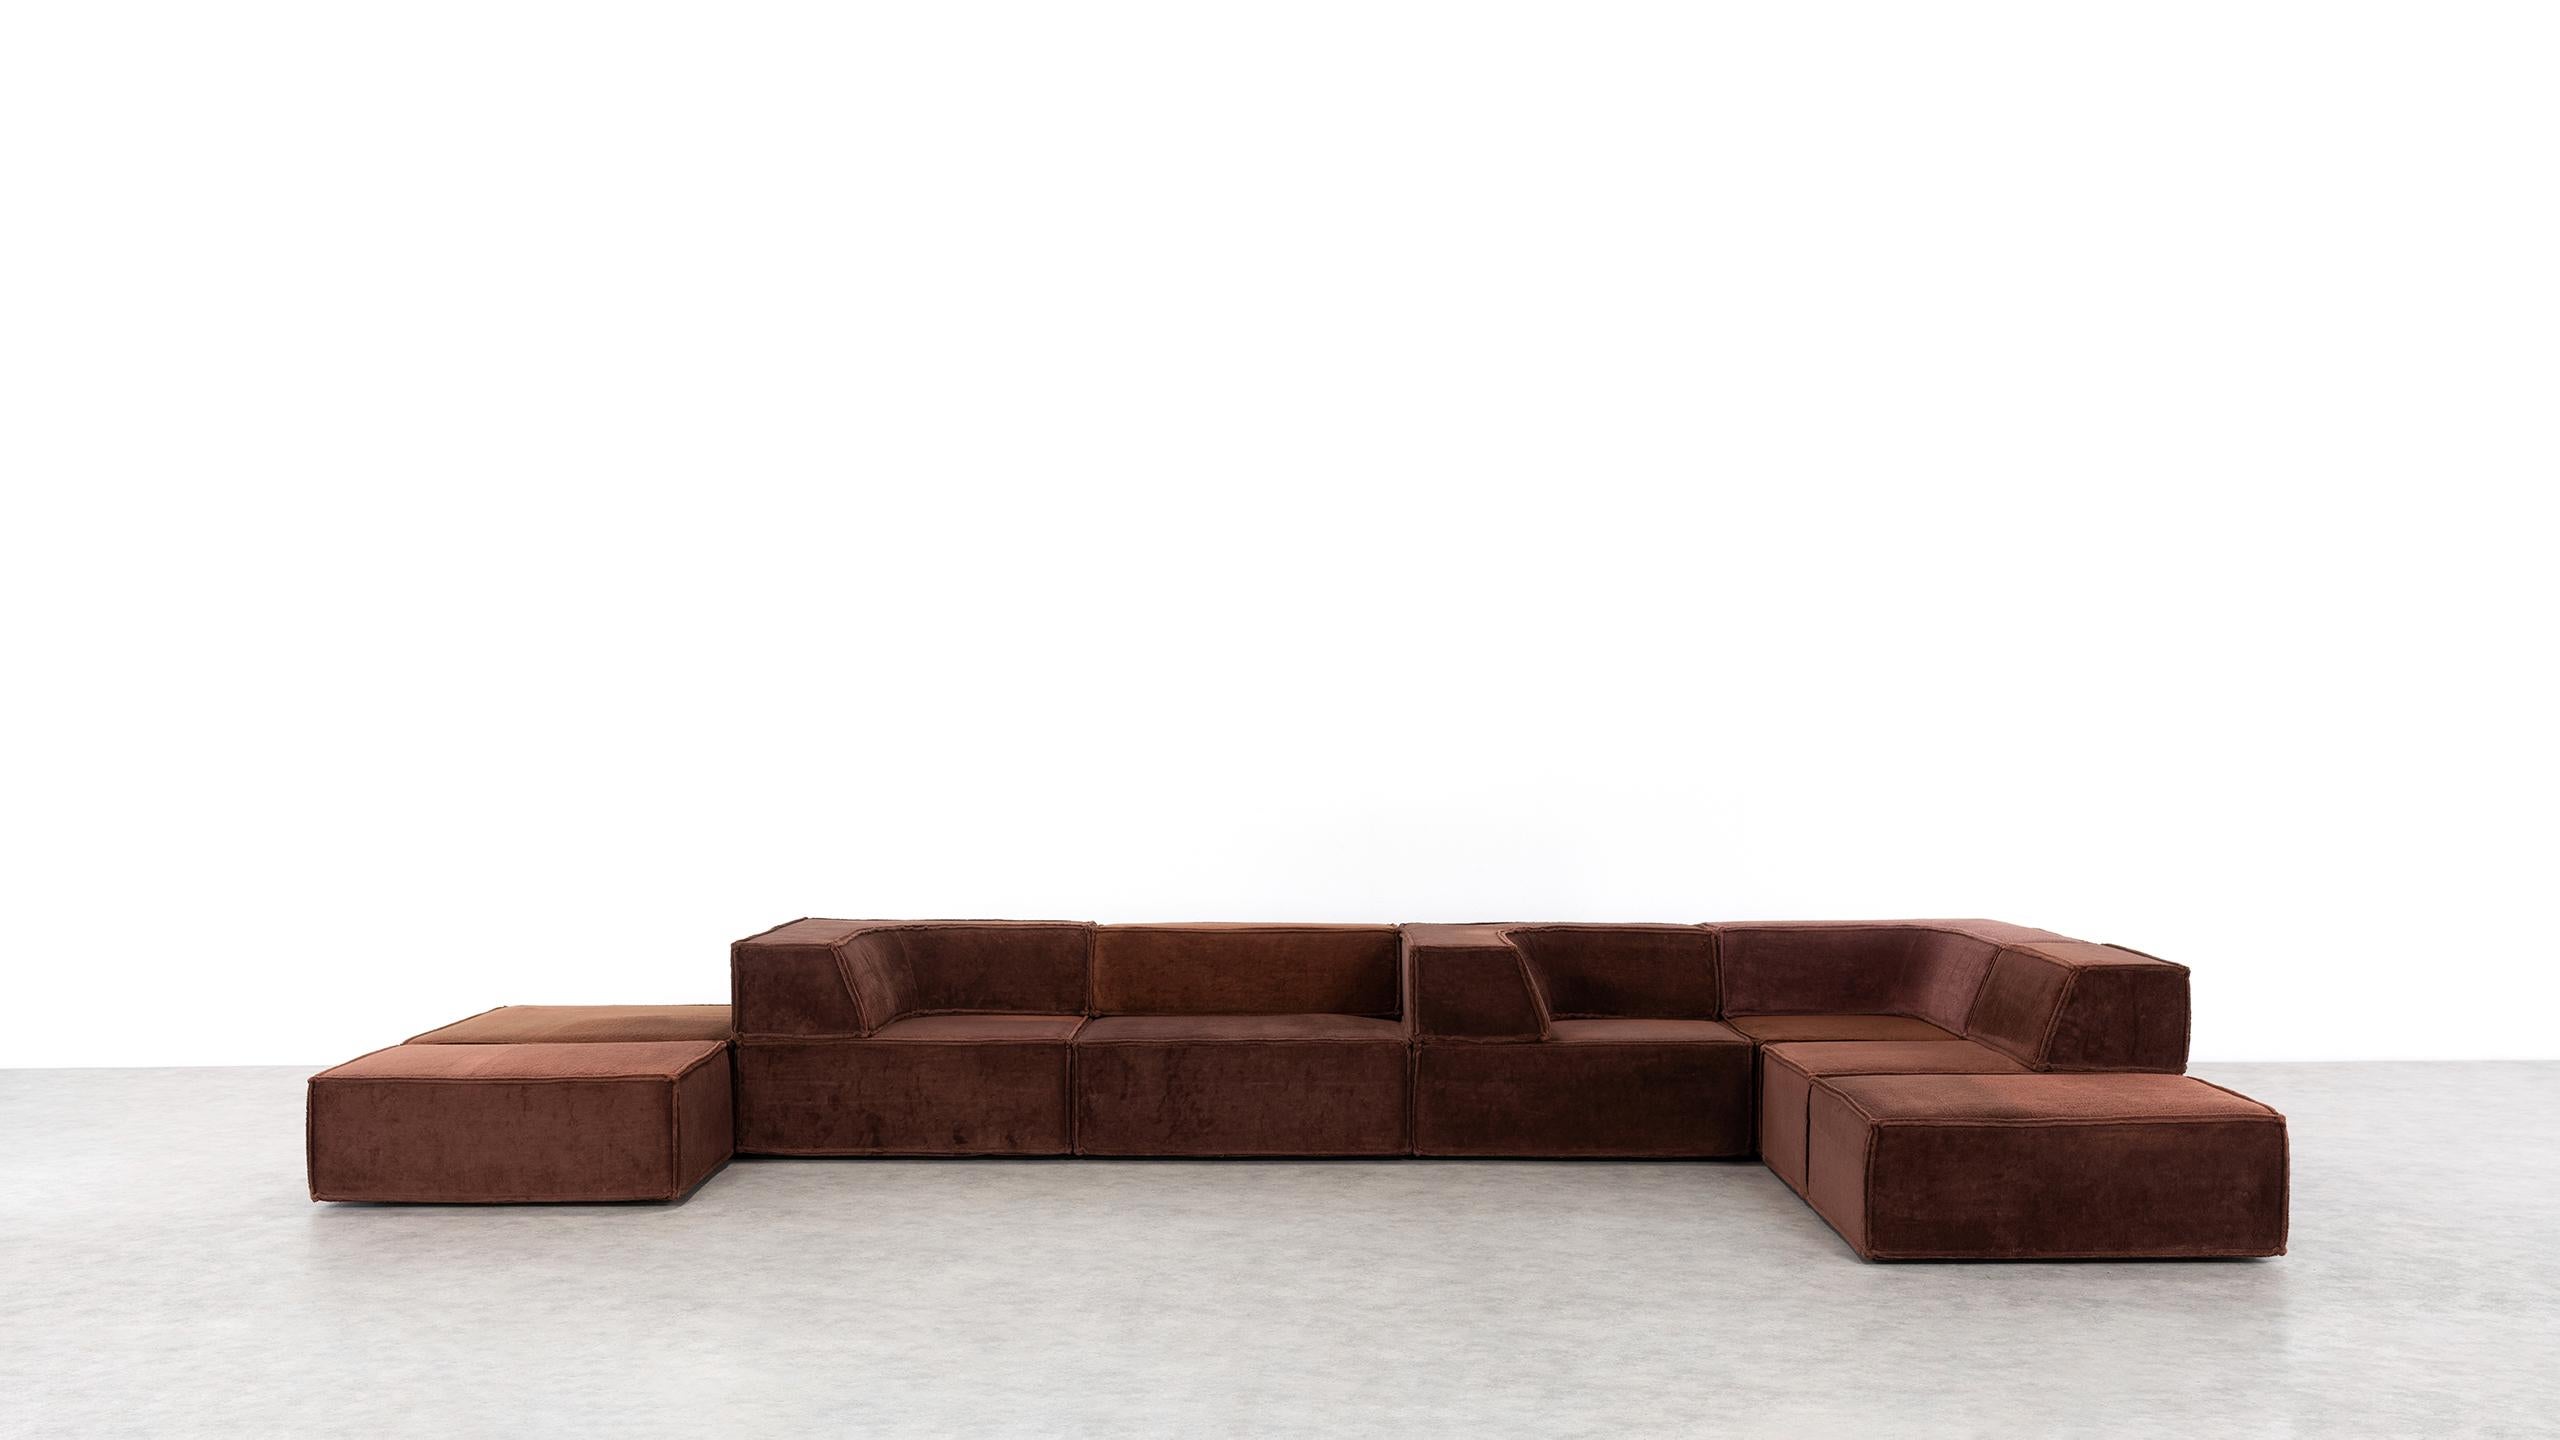 German COR Trio Modular Sofa, Giant Landscape in Chocolate Brown, 1972 by Team Form AG